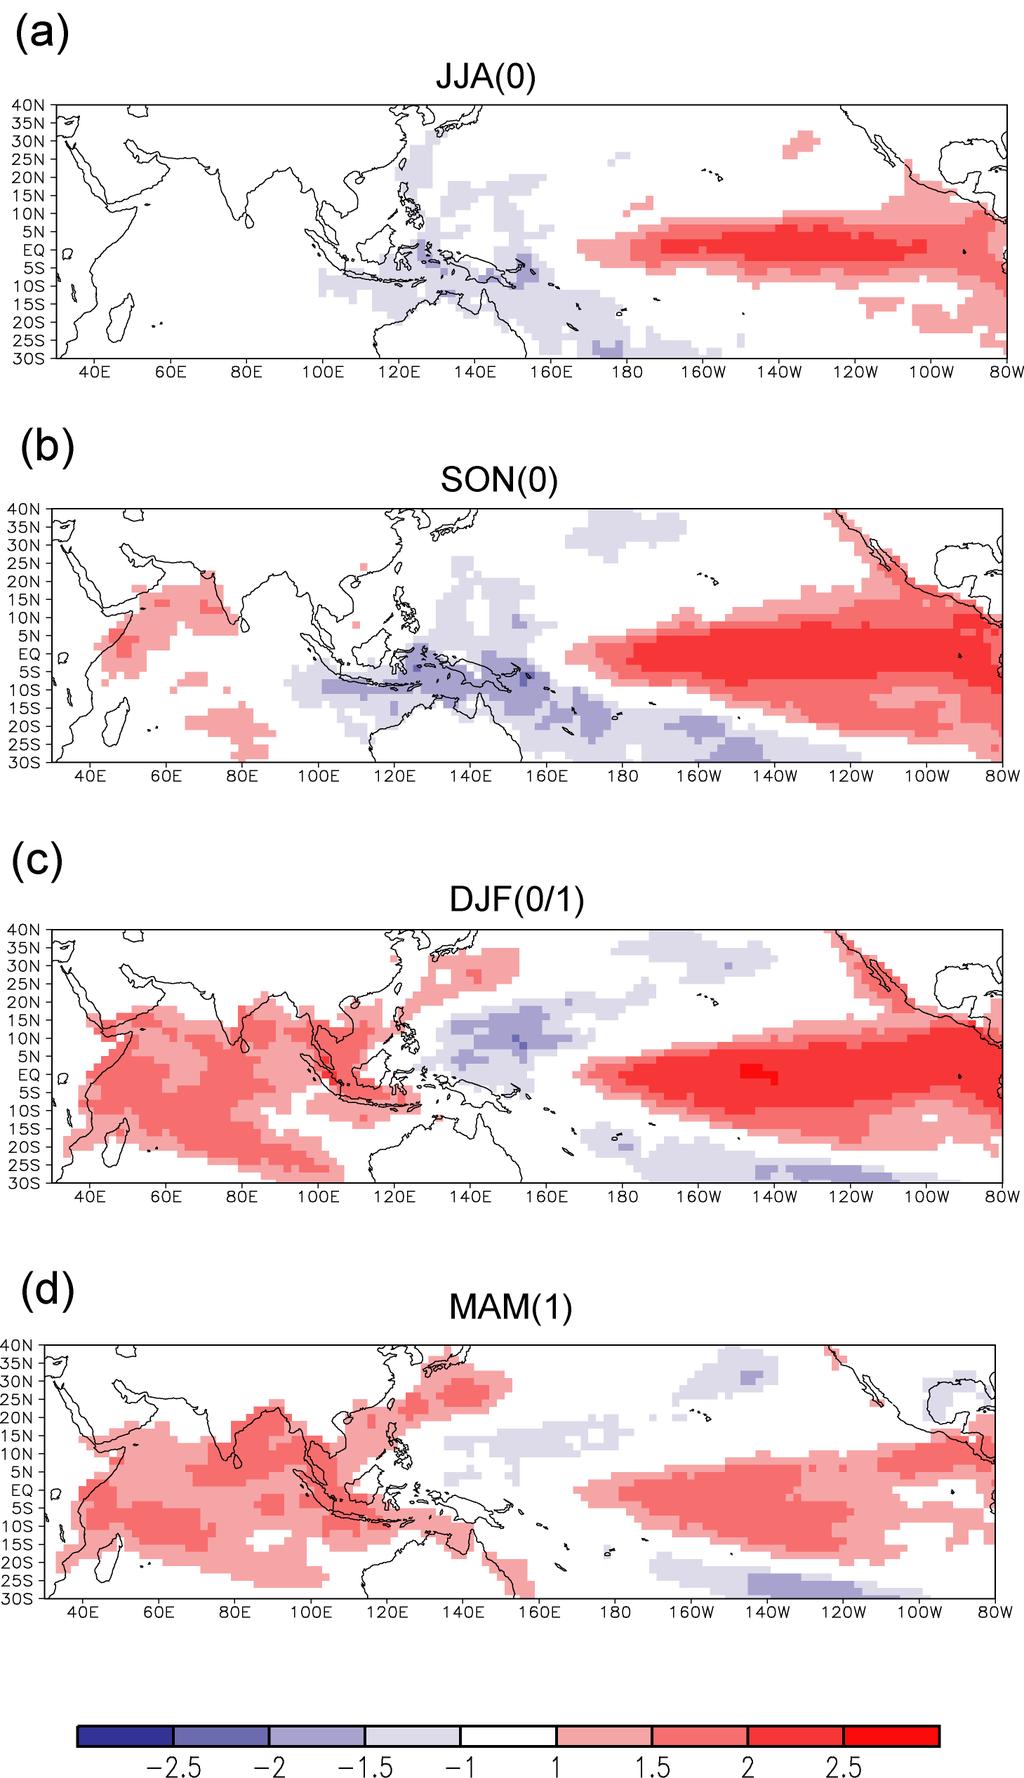 Typical evolution anomalous SST associated with an